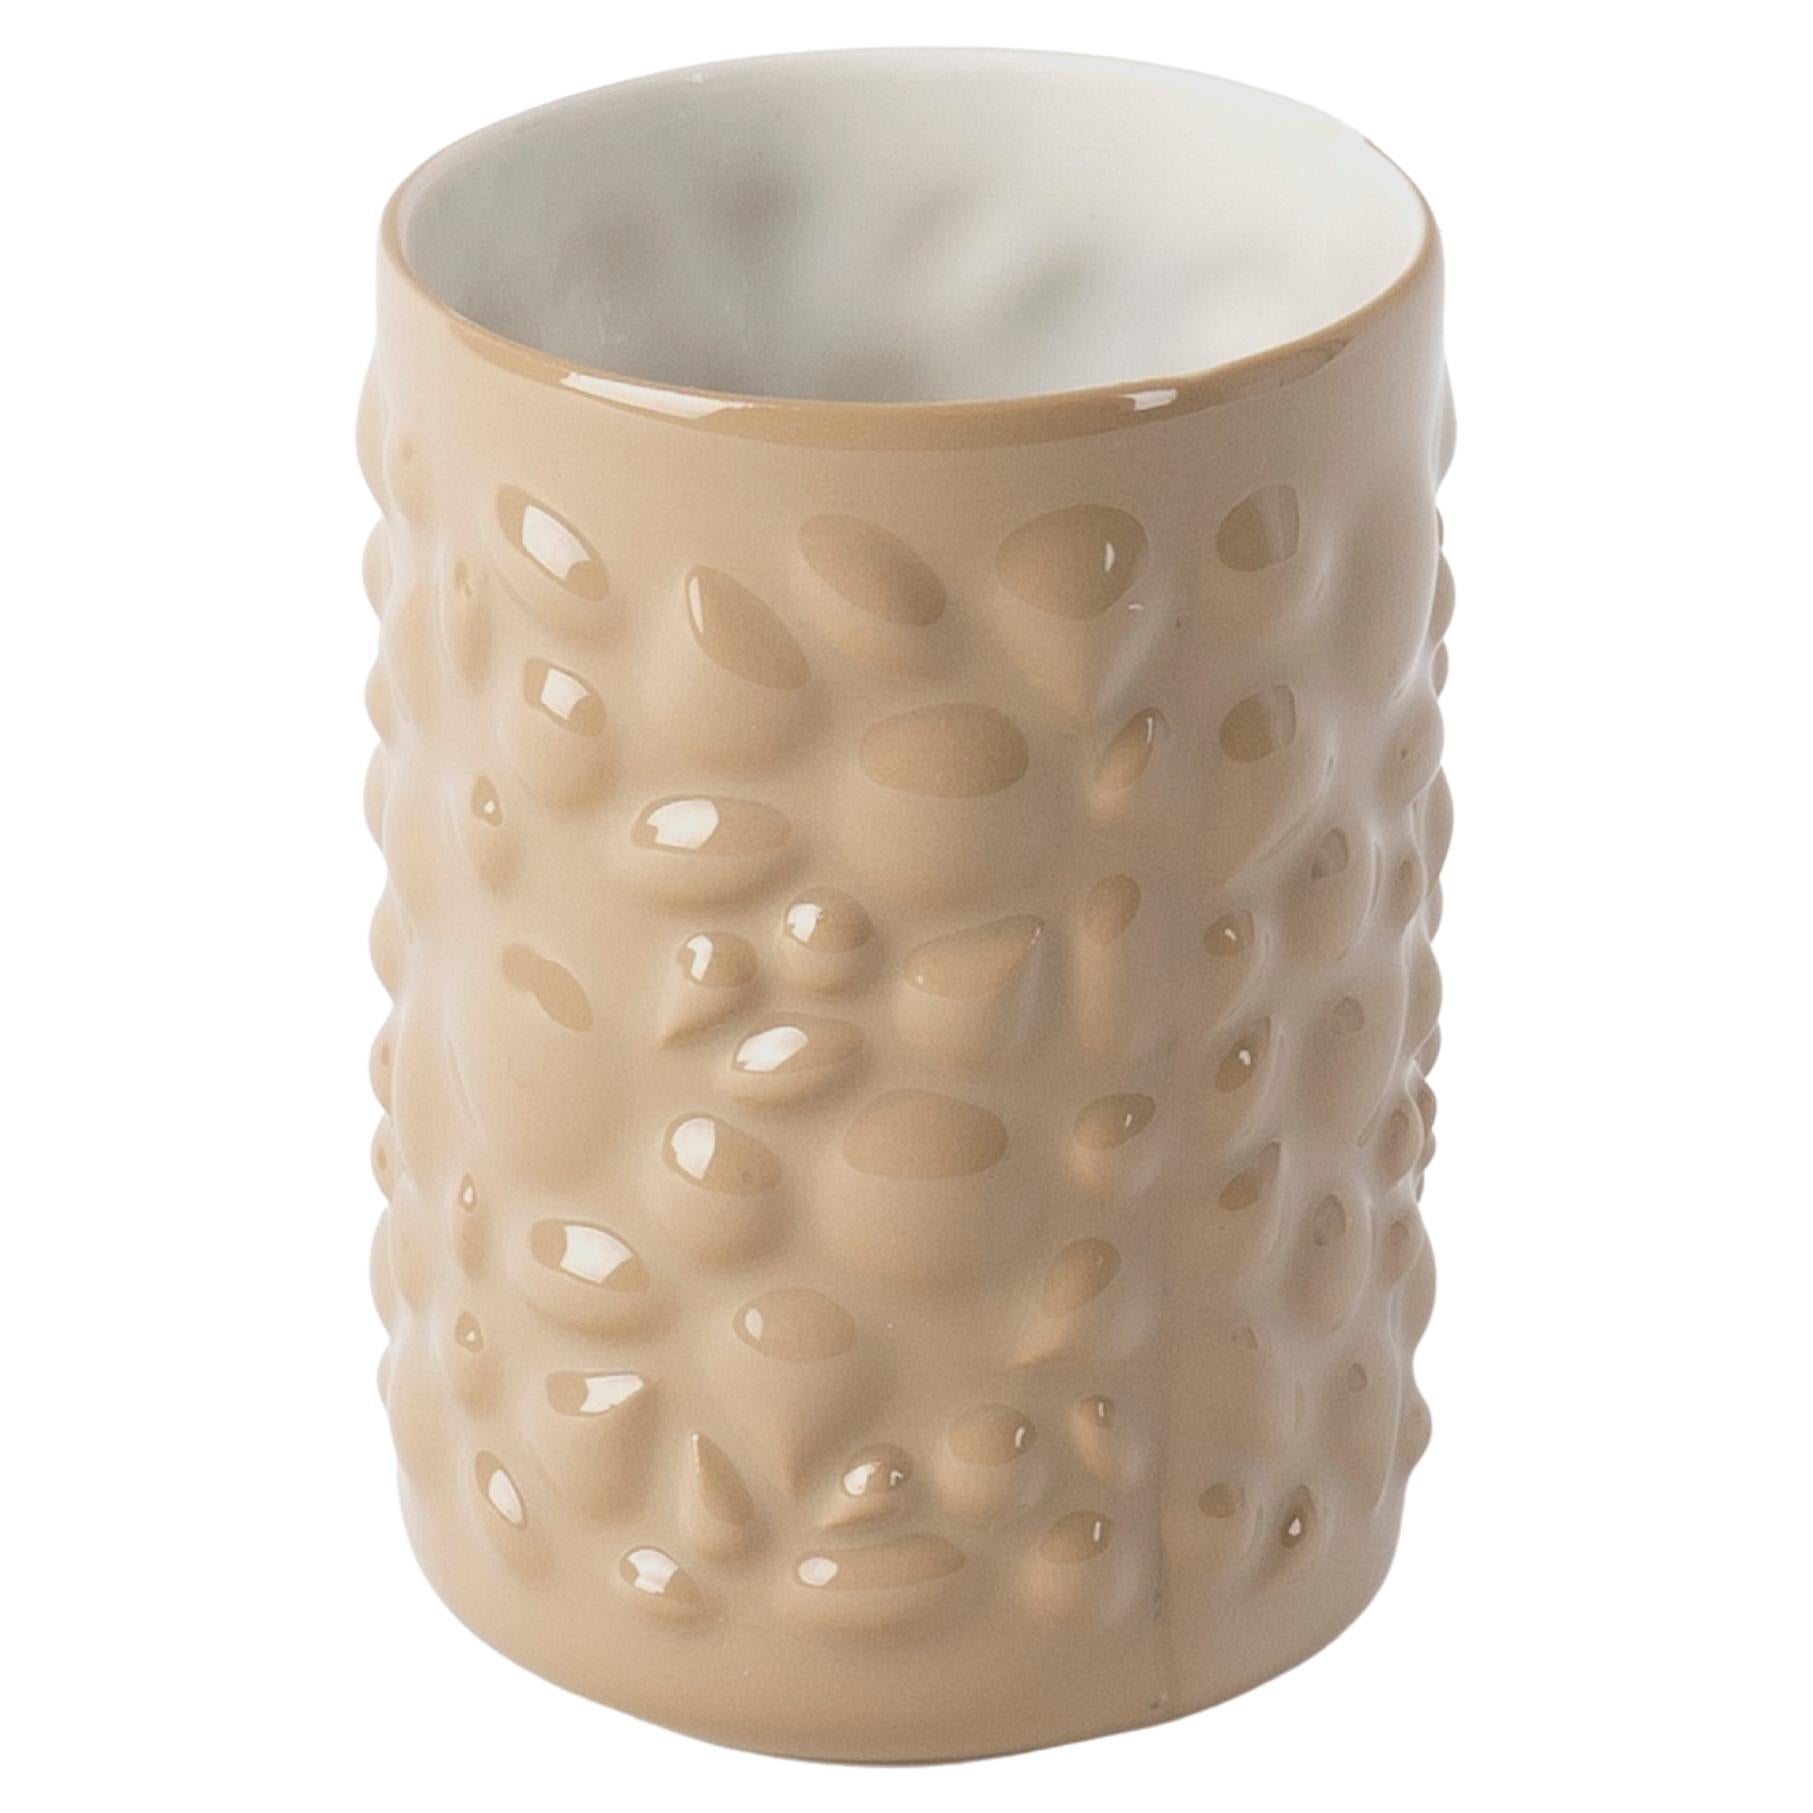 Contemporary Modern, Justine Porcelain Latte Cup Without Handle, Beige & White